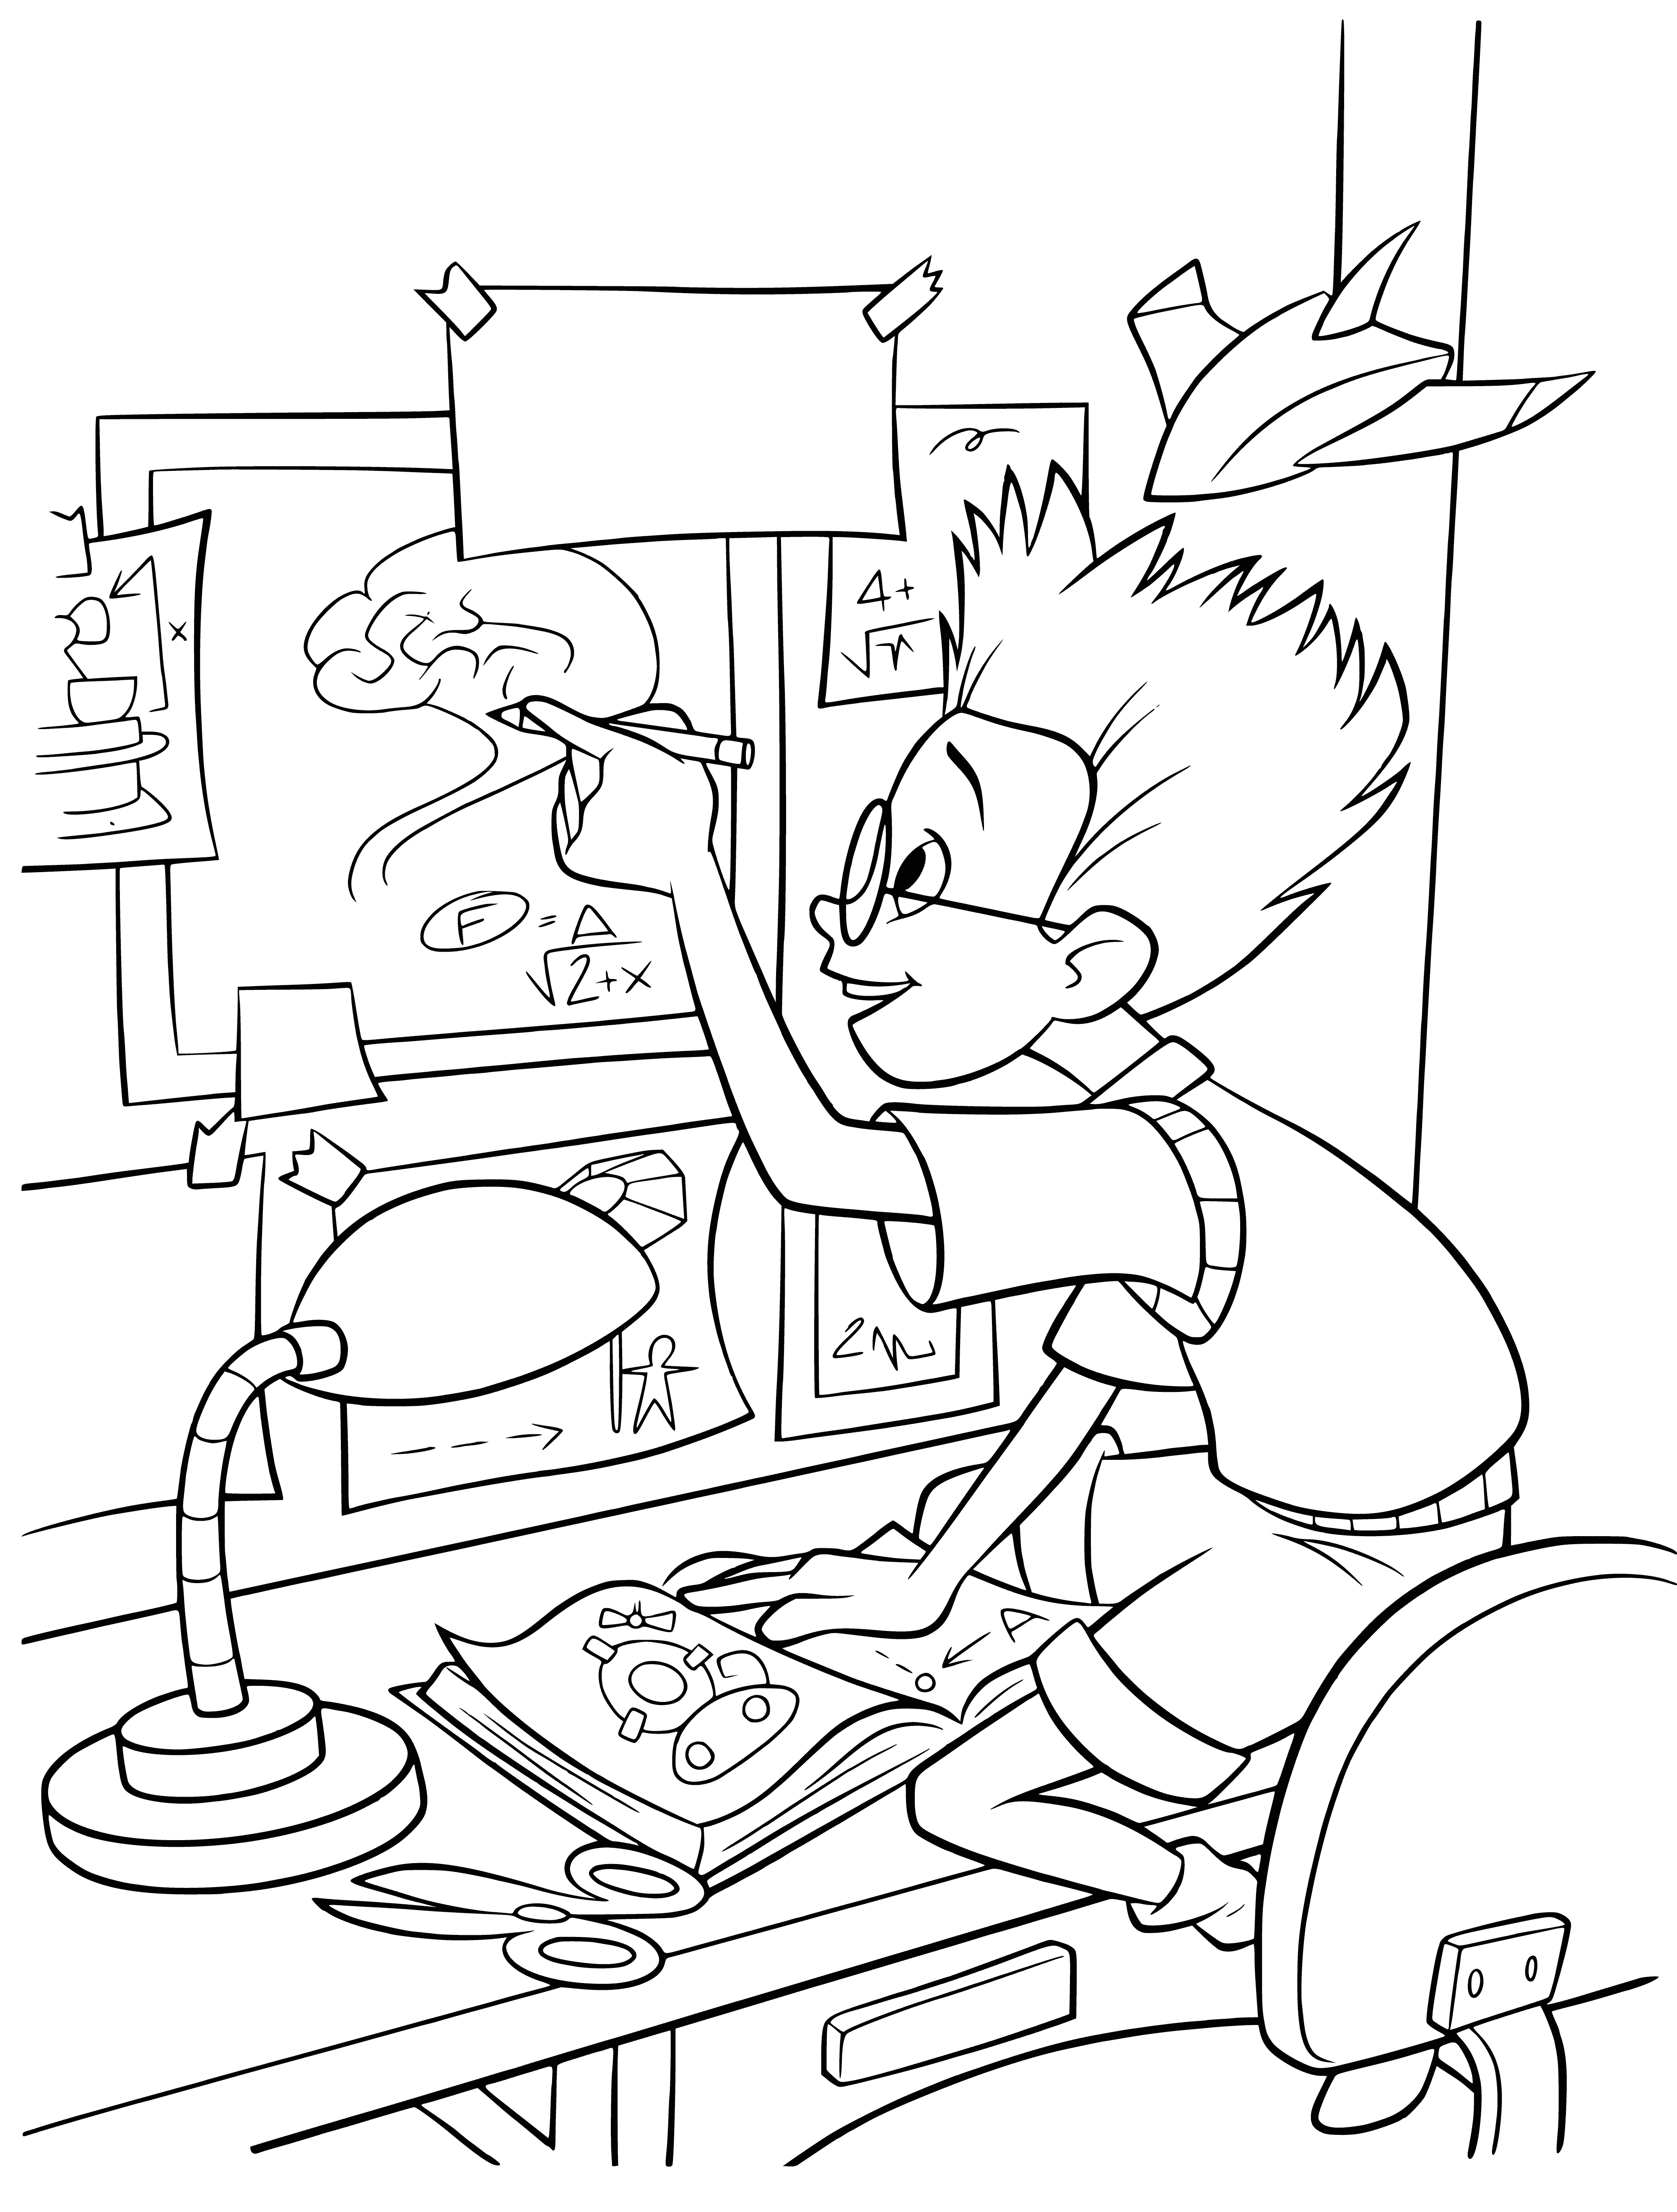 Lewis - inventor coloring page